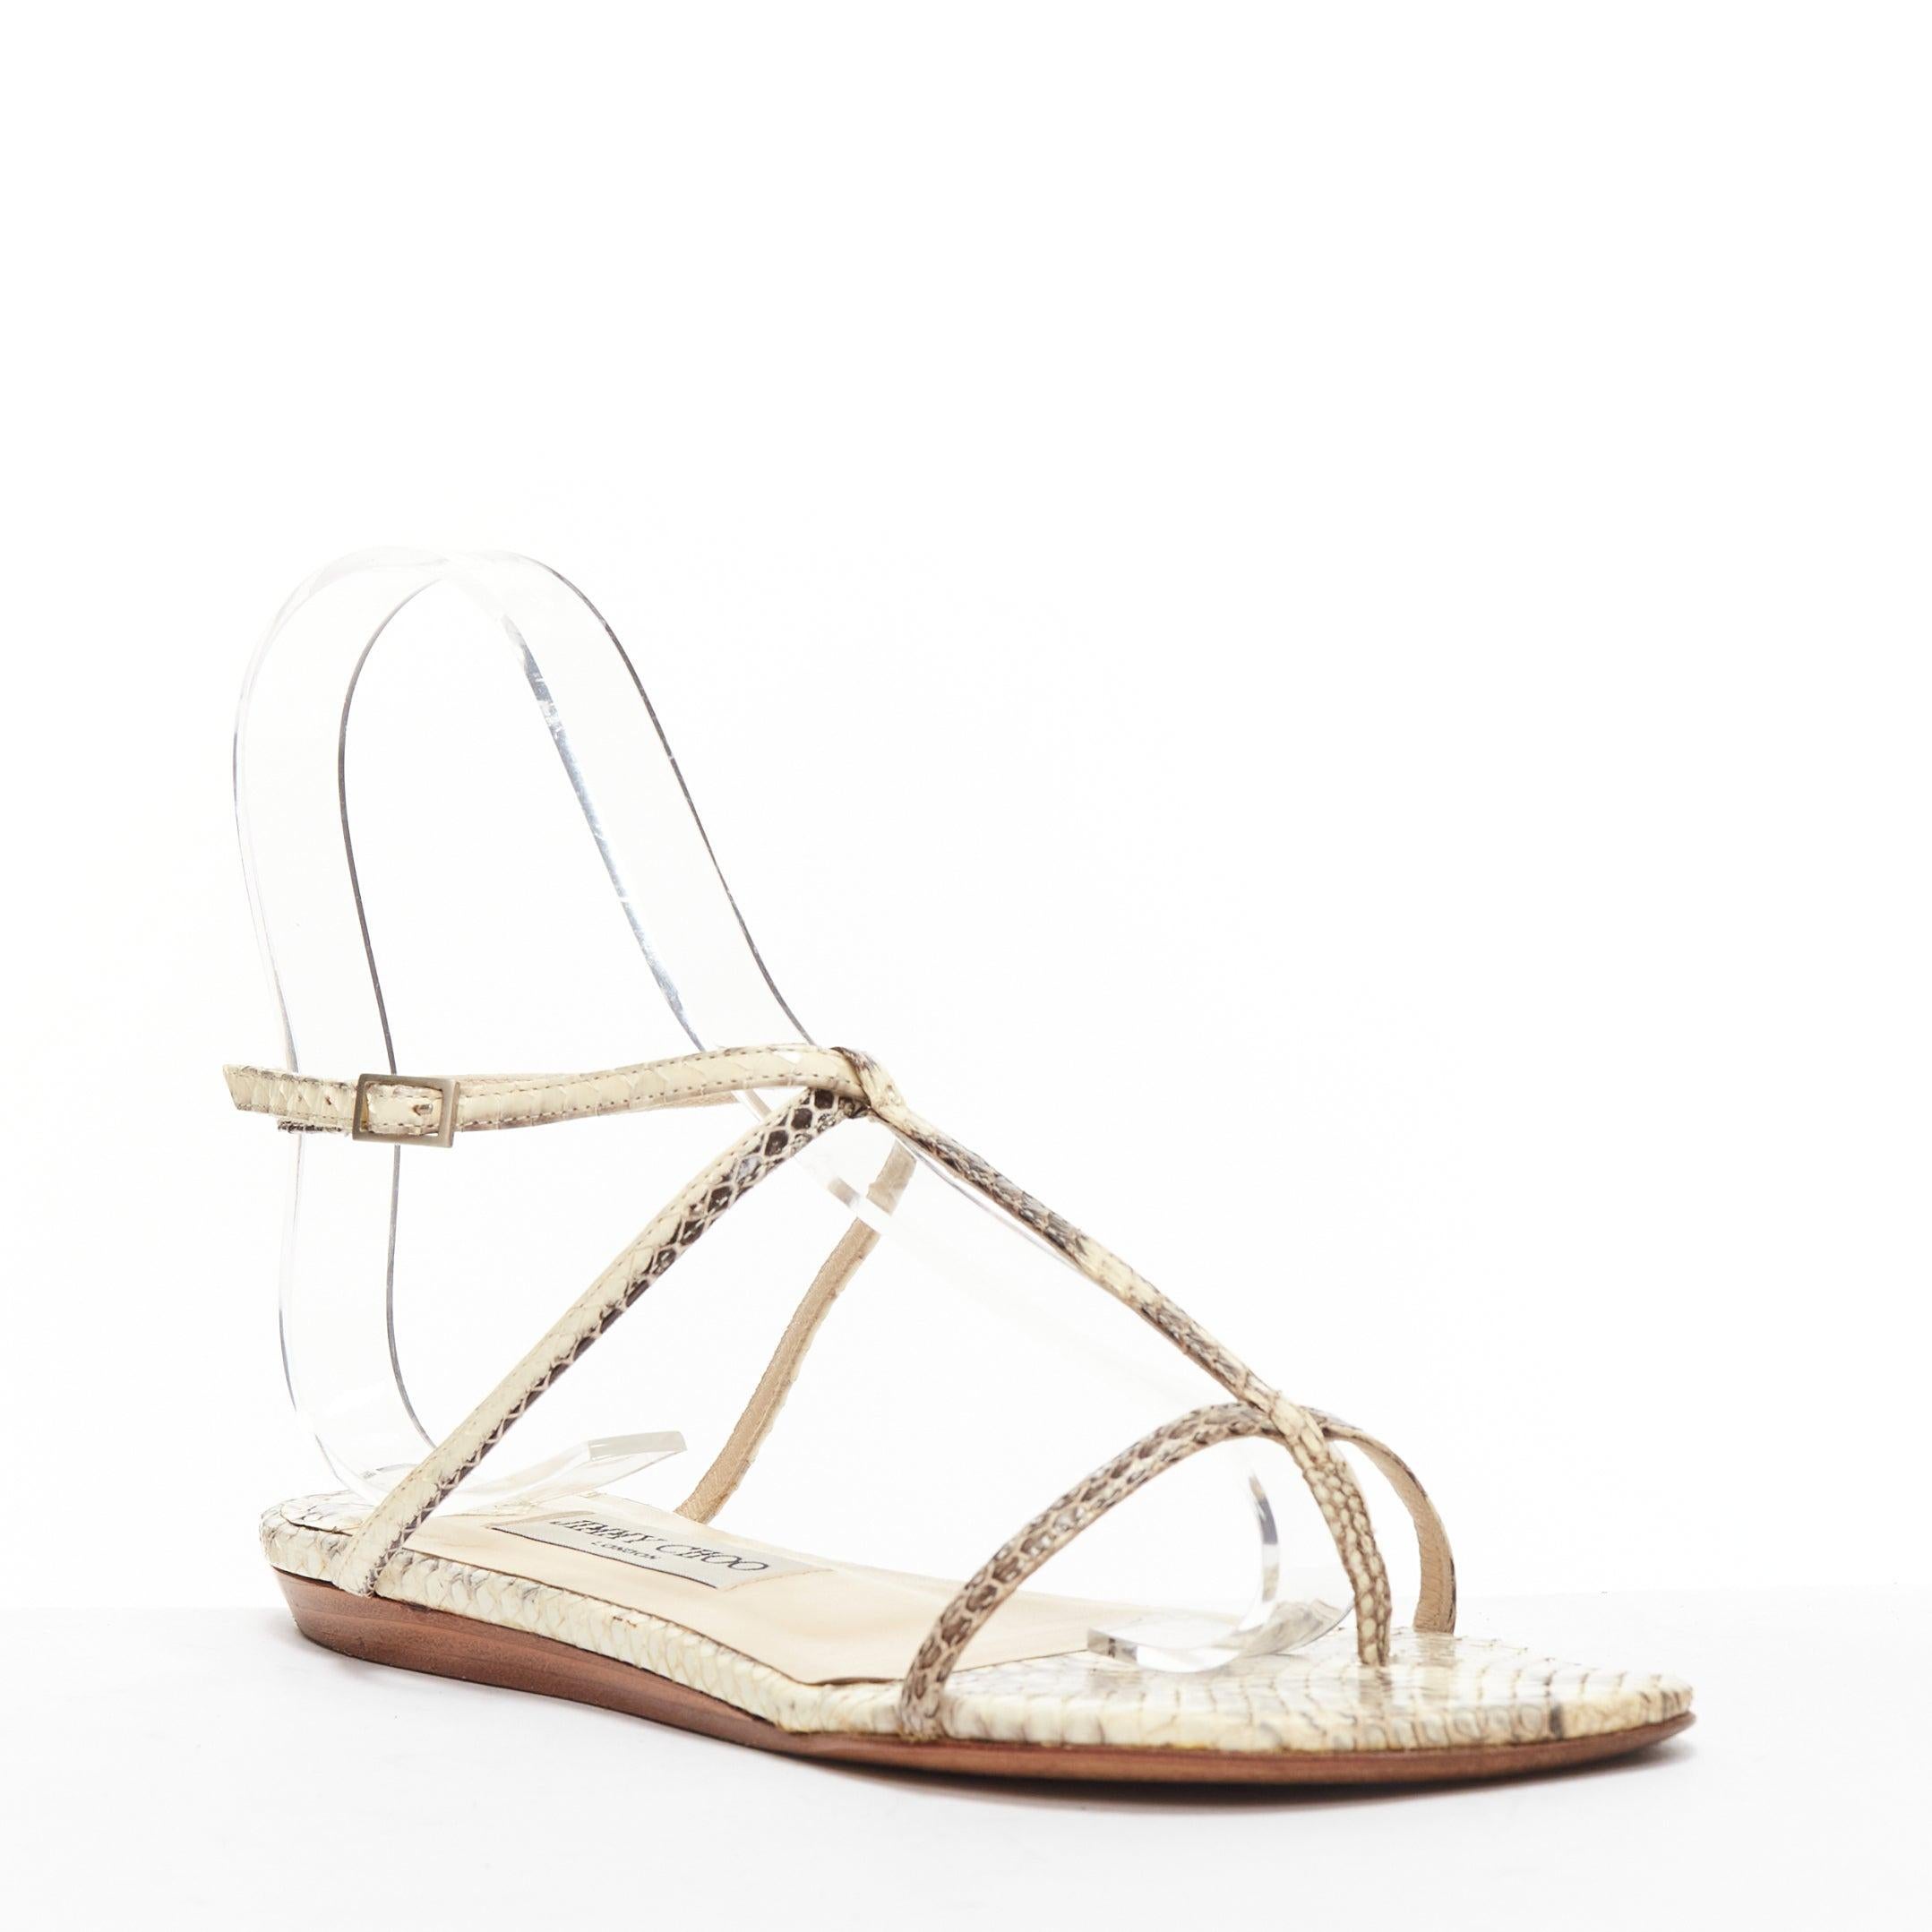 JIMMY CHOO nude scaled leather strappy thong flat sandals EU37
Reference: SNKO/A00368
Brand: Jimmy Choo
Material: Leather
Color: Nude
Pattern: Animal Print
Closure: Ankle Strap
Lining: Nude Leather
Made in: Italy

CONDITION:
Condition: Very good,